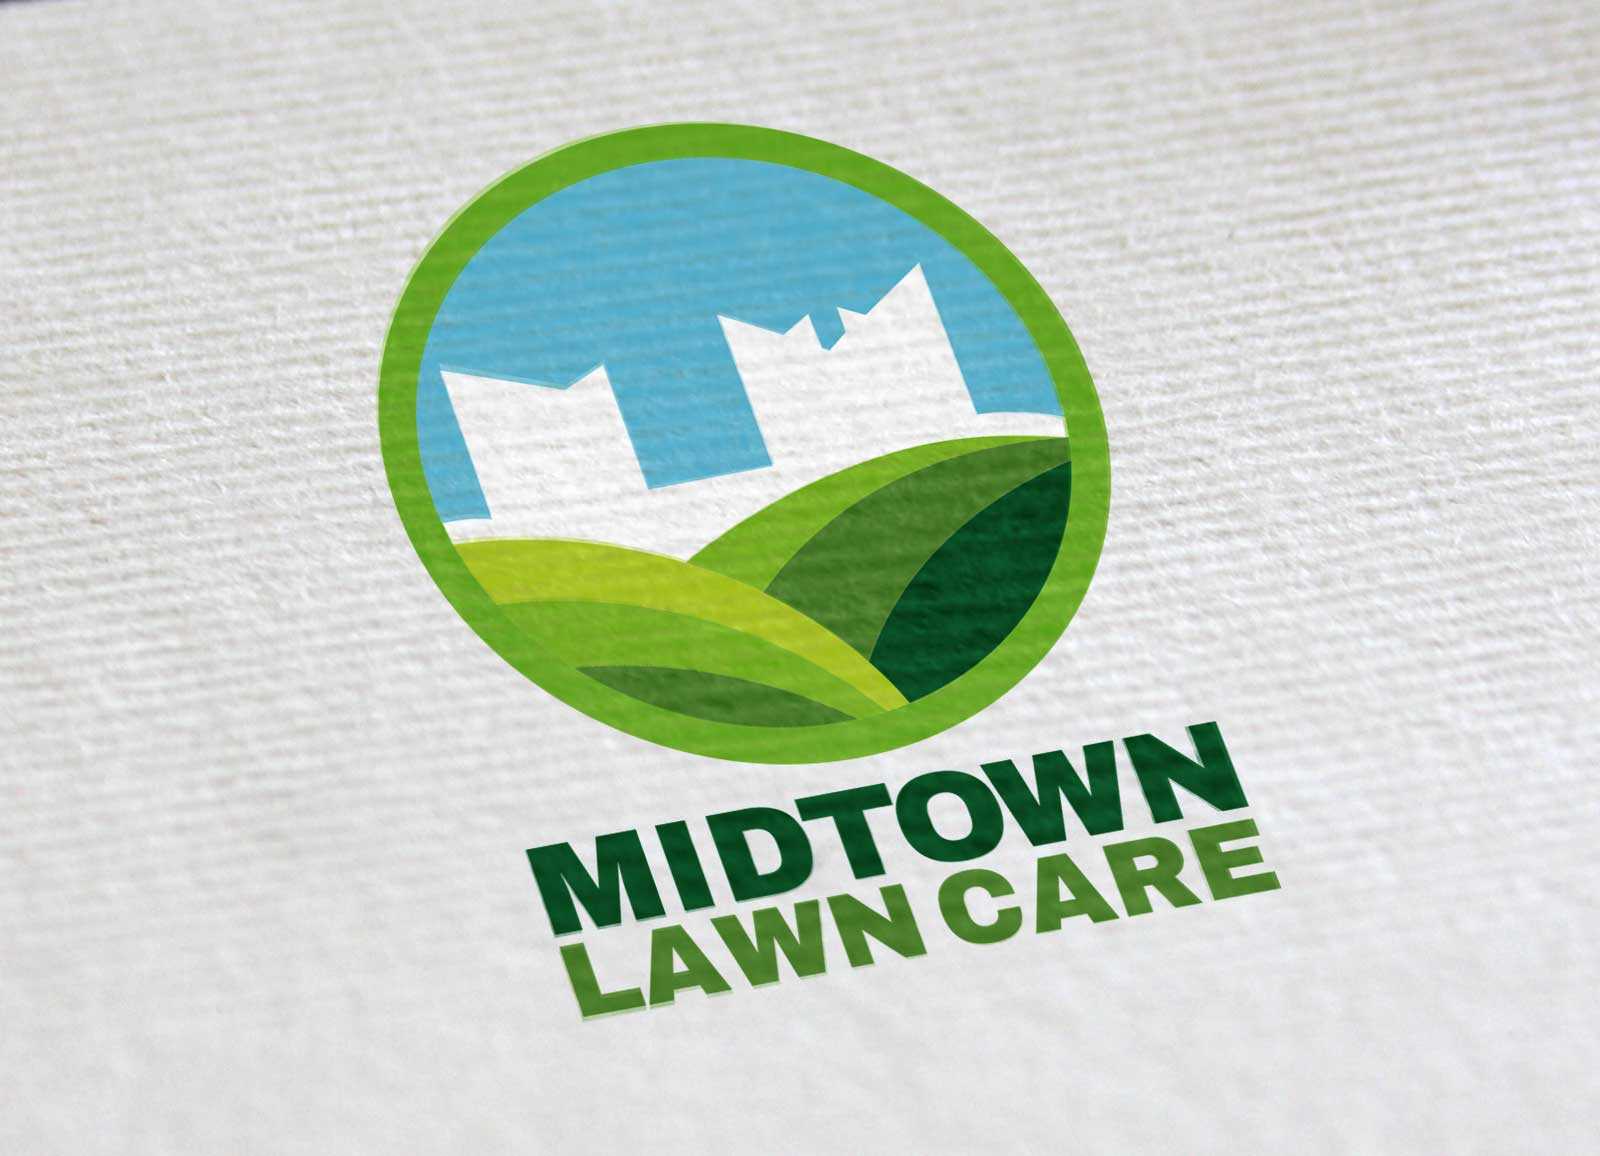 Example of lawn care logo design.